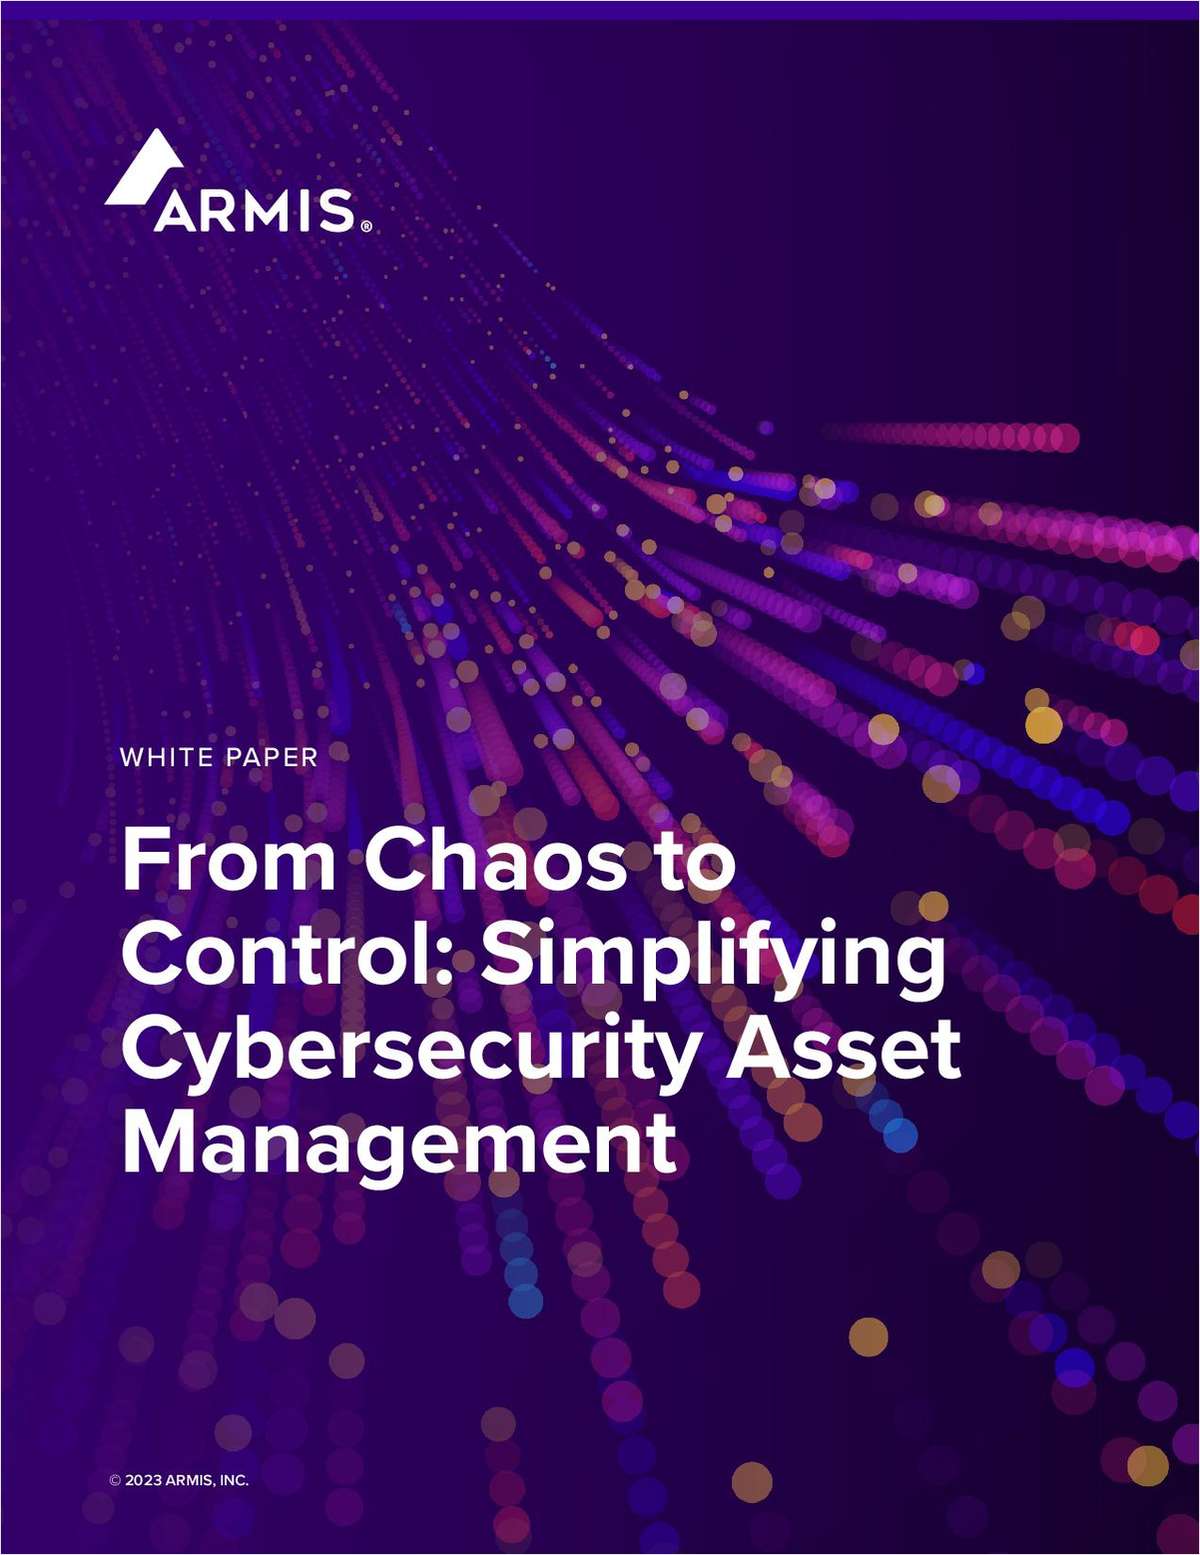 From Chaos to Control: Simplifying Cybersecurity Asset Management